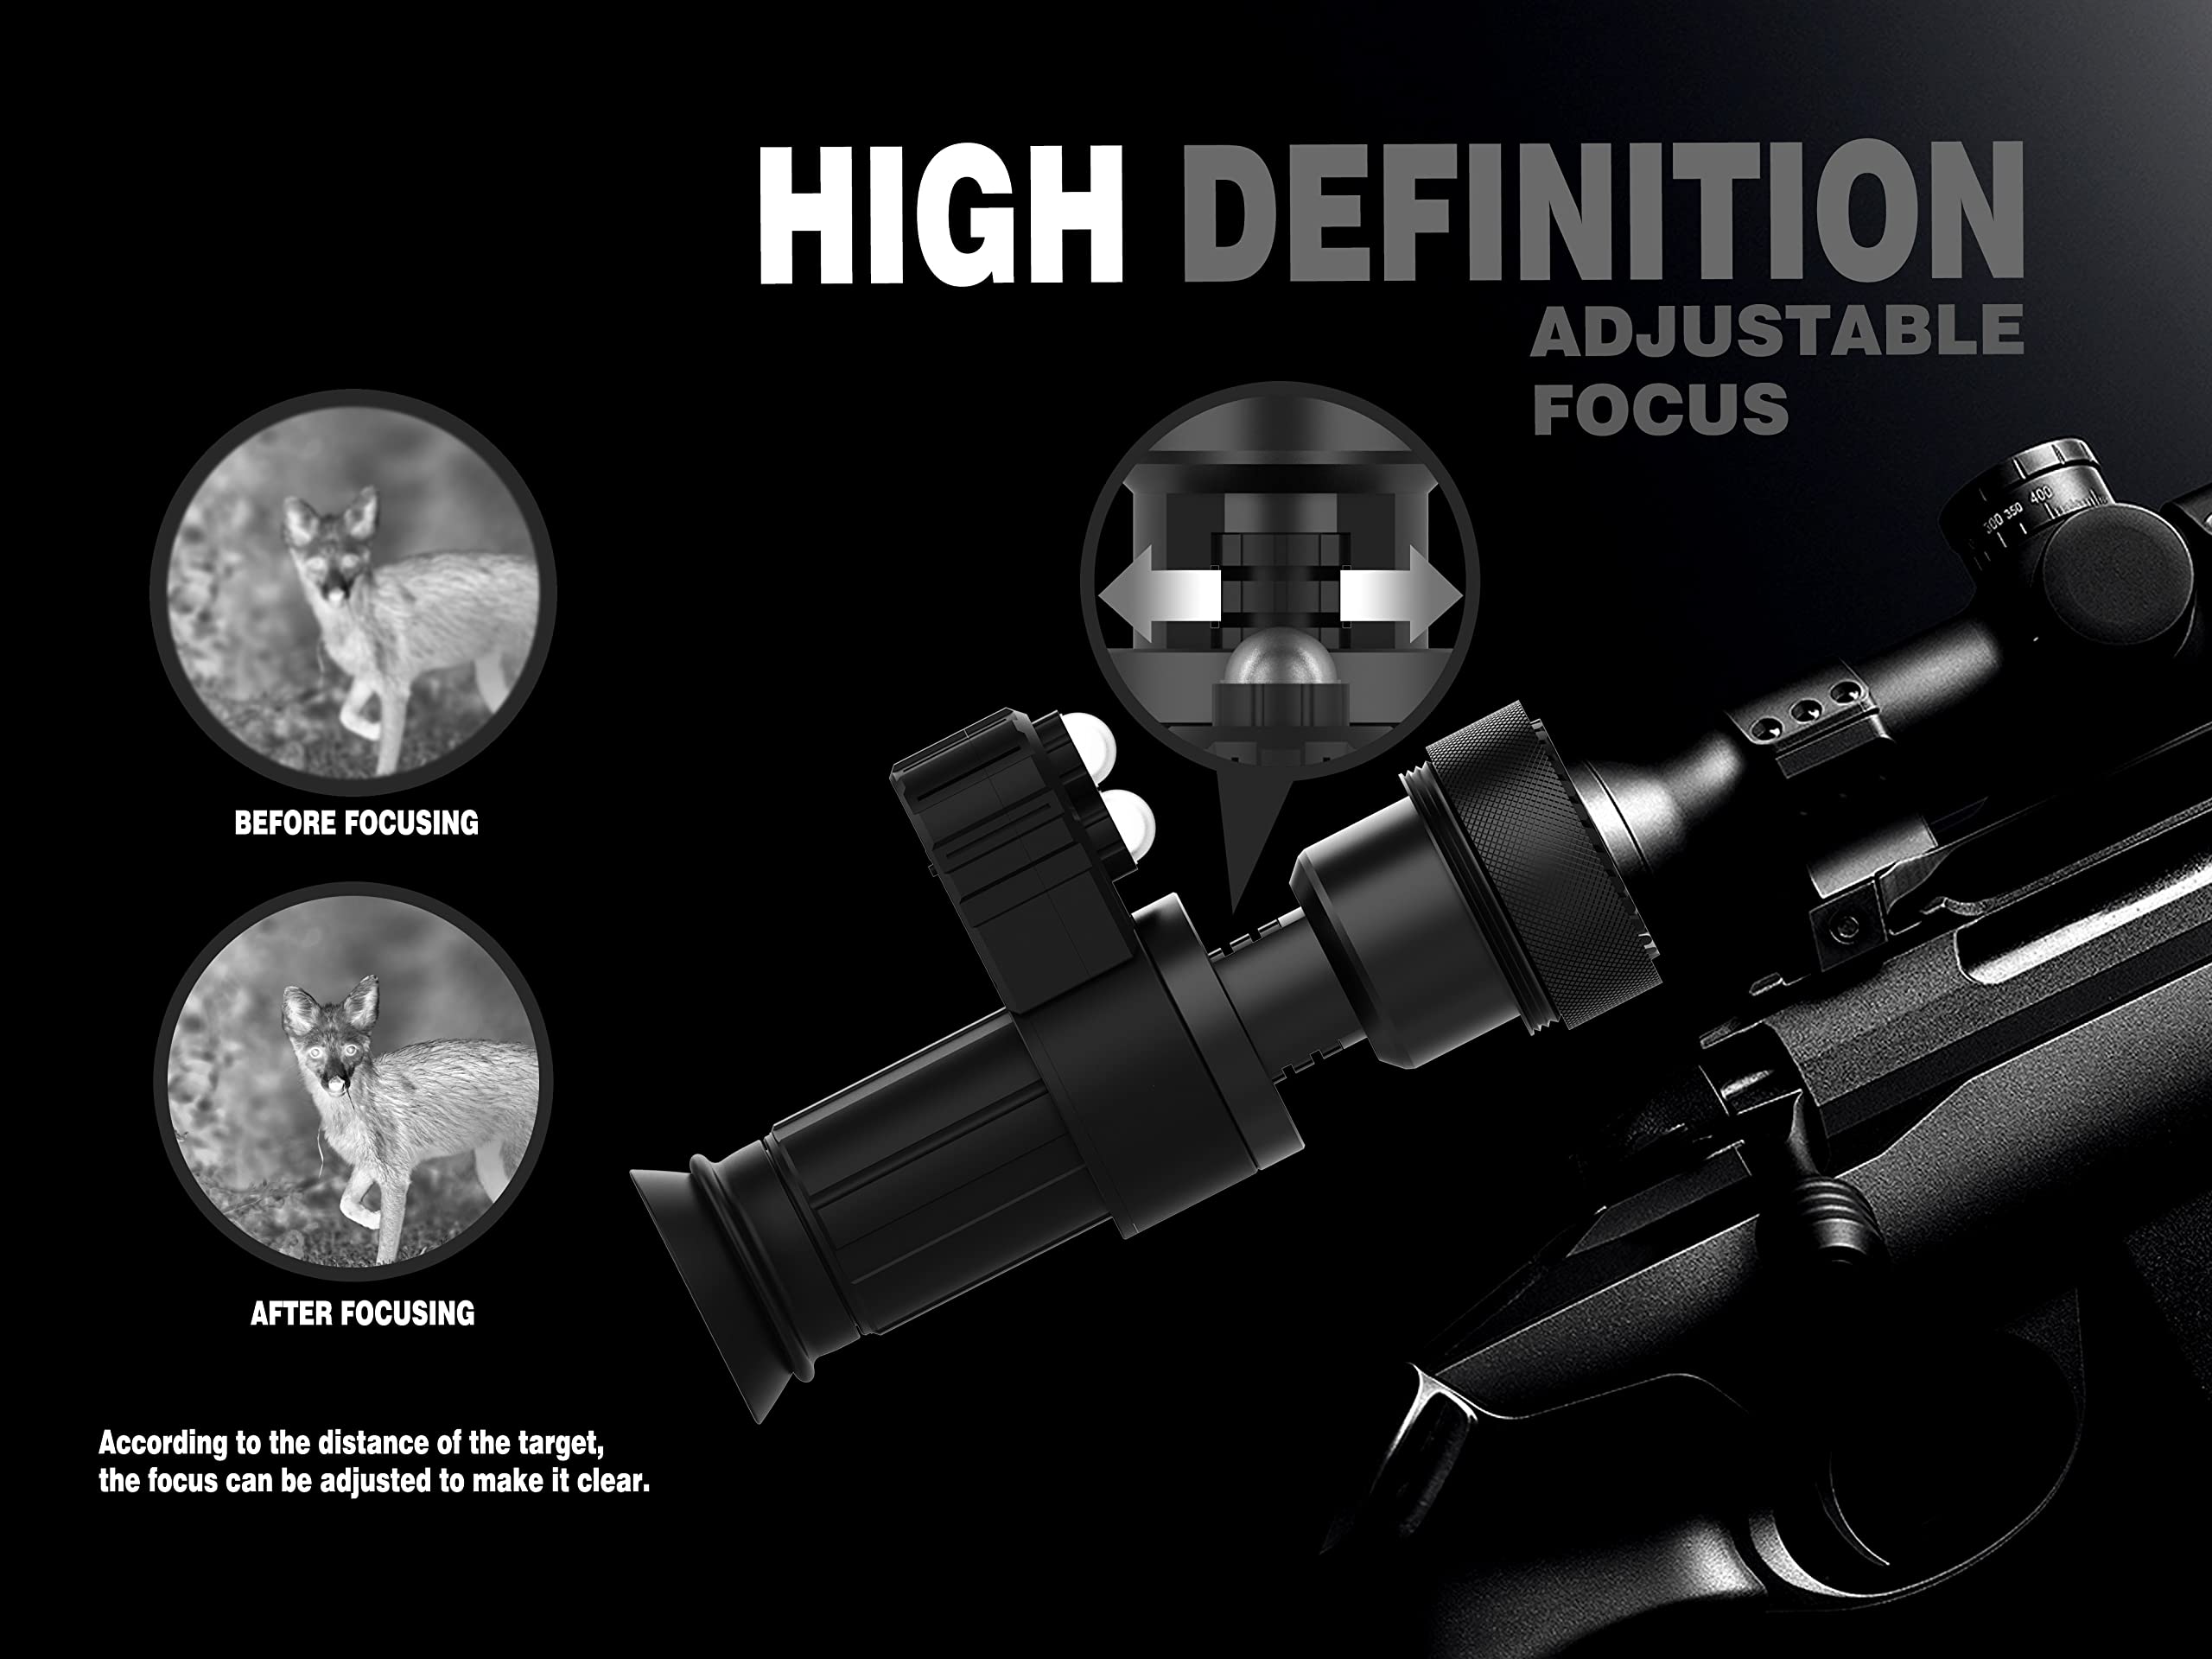 Digital Night Vision Rifle Scope, 1.54 inch Screen, Optical Aiming, monocular sightmark, Suitable for All Black Outdoor Hunting Environment